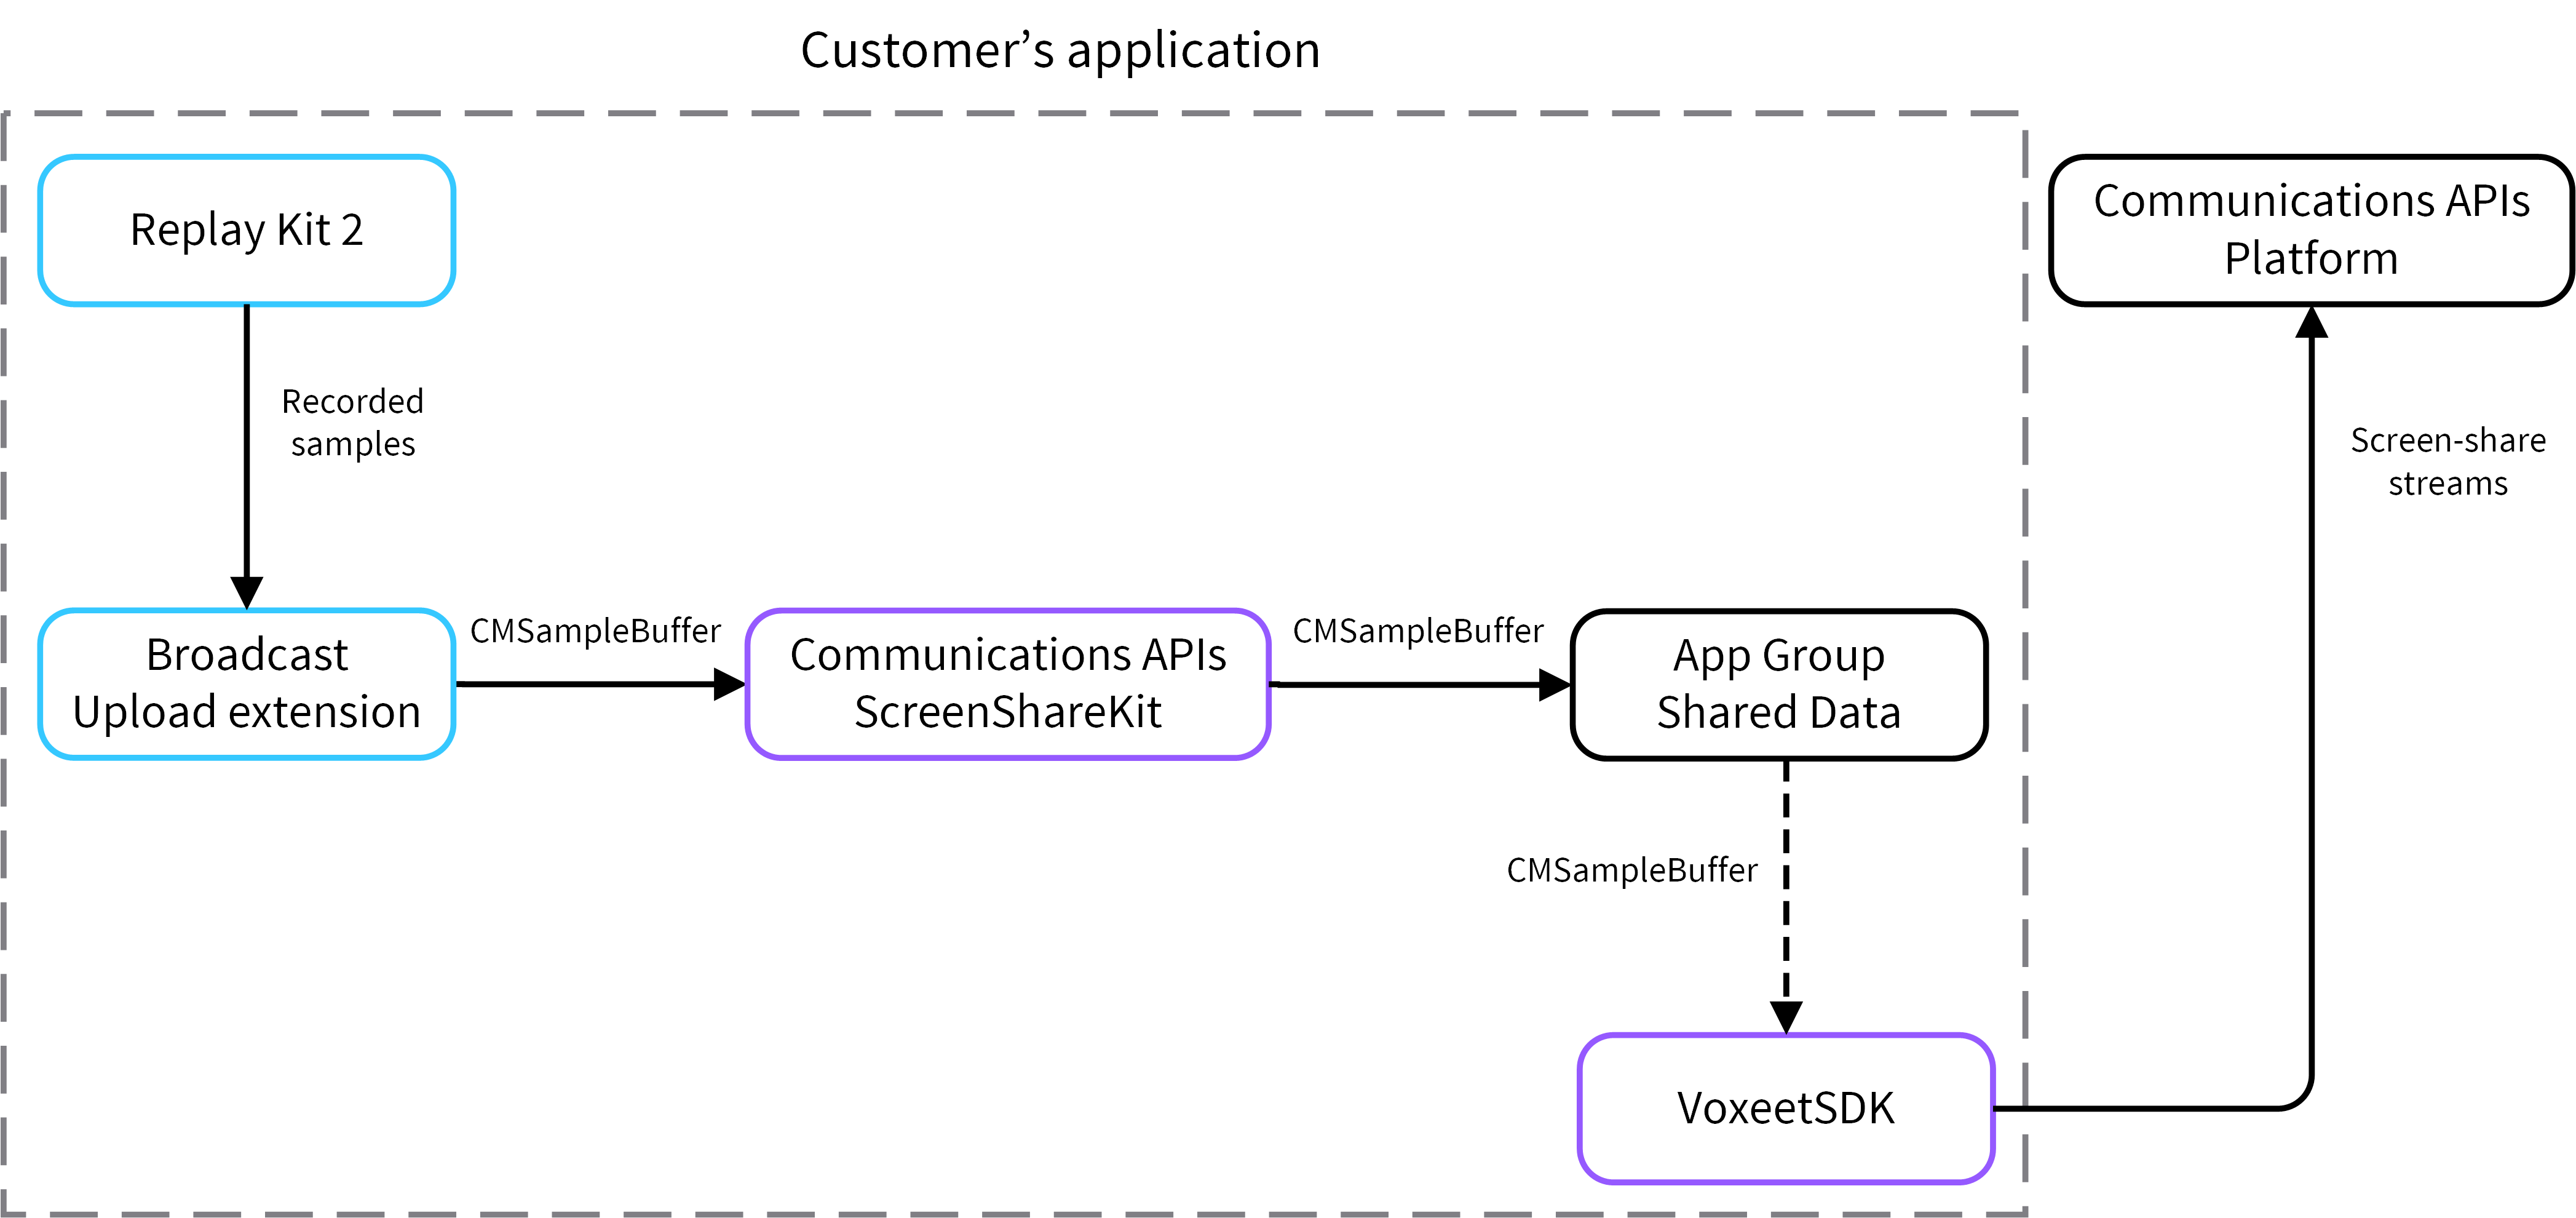 The screen-share workflow